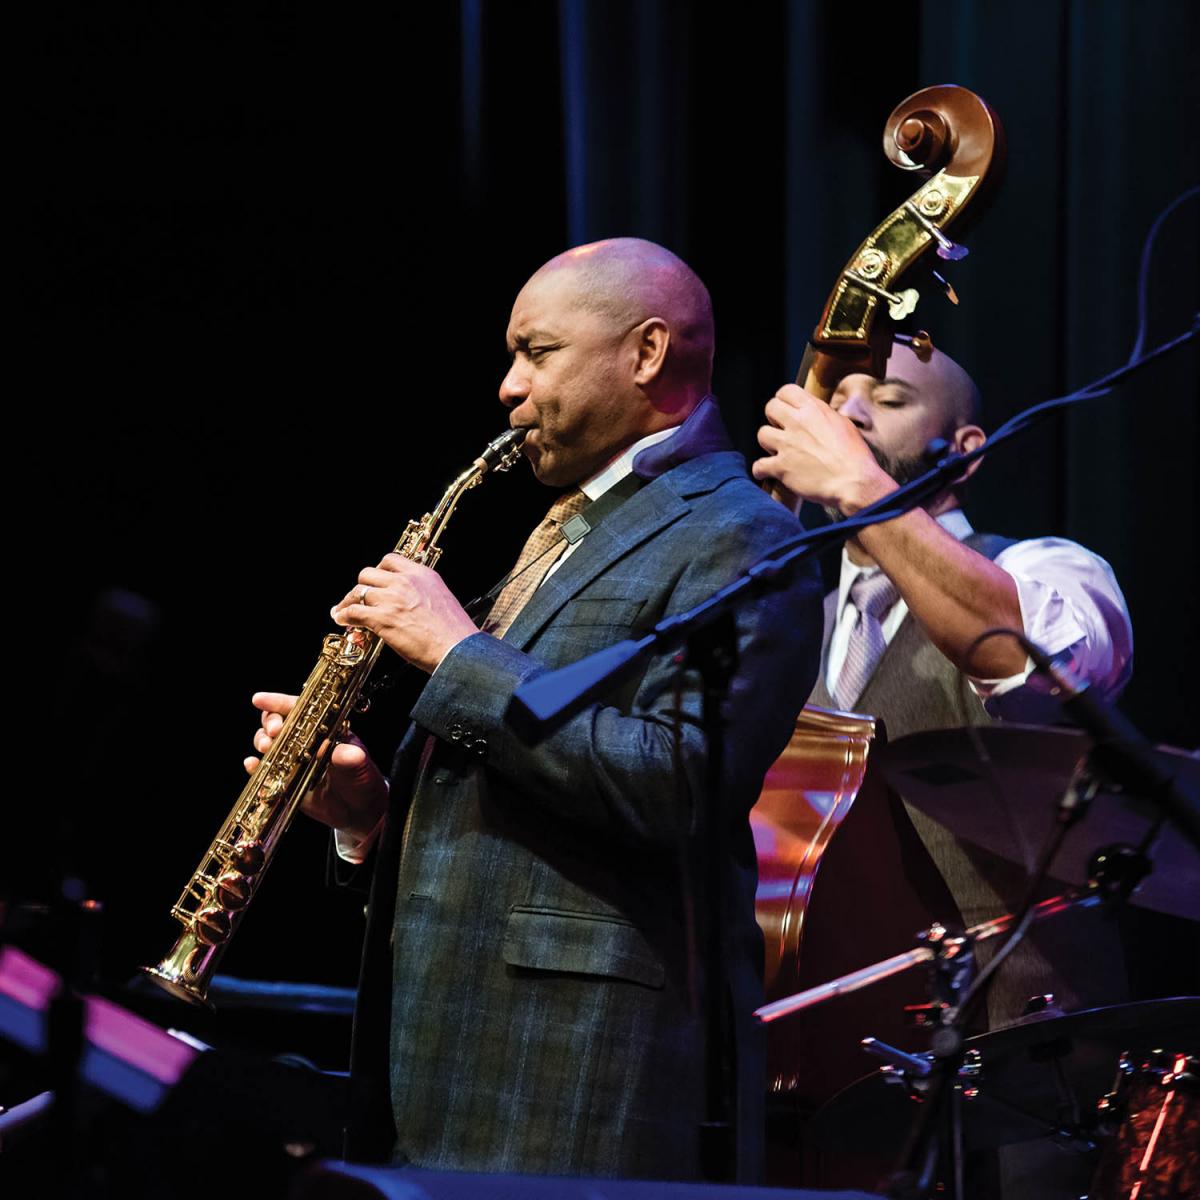 This year’s Esbenshade Series brought top talent to the community, including a performance by the Branford Marsalis Quartet with guest vocalist Kurt Elling.